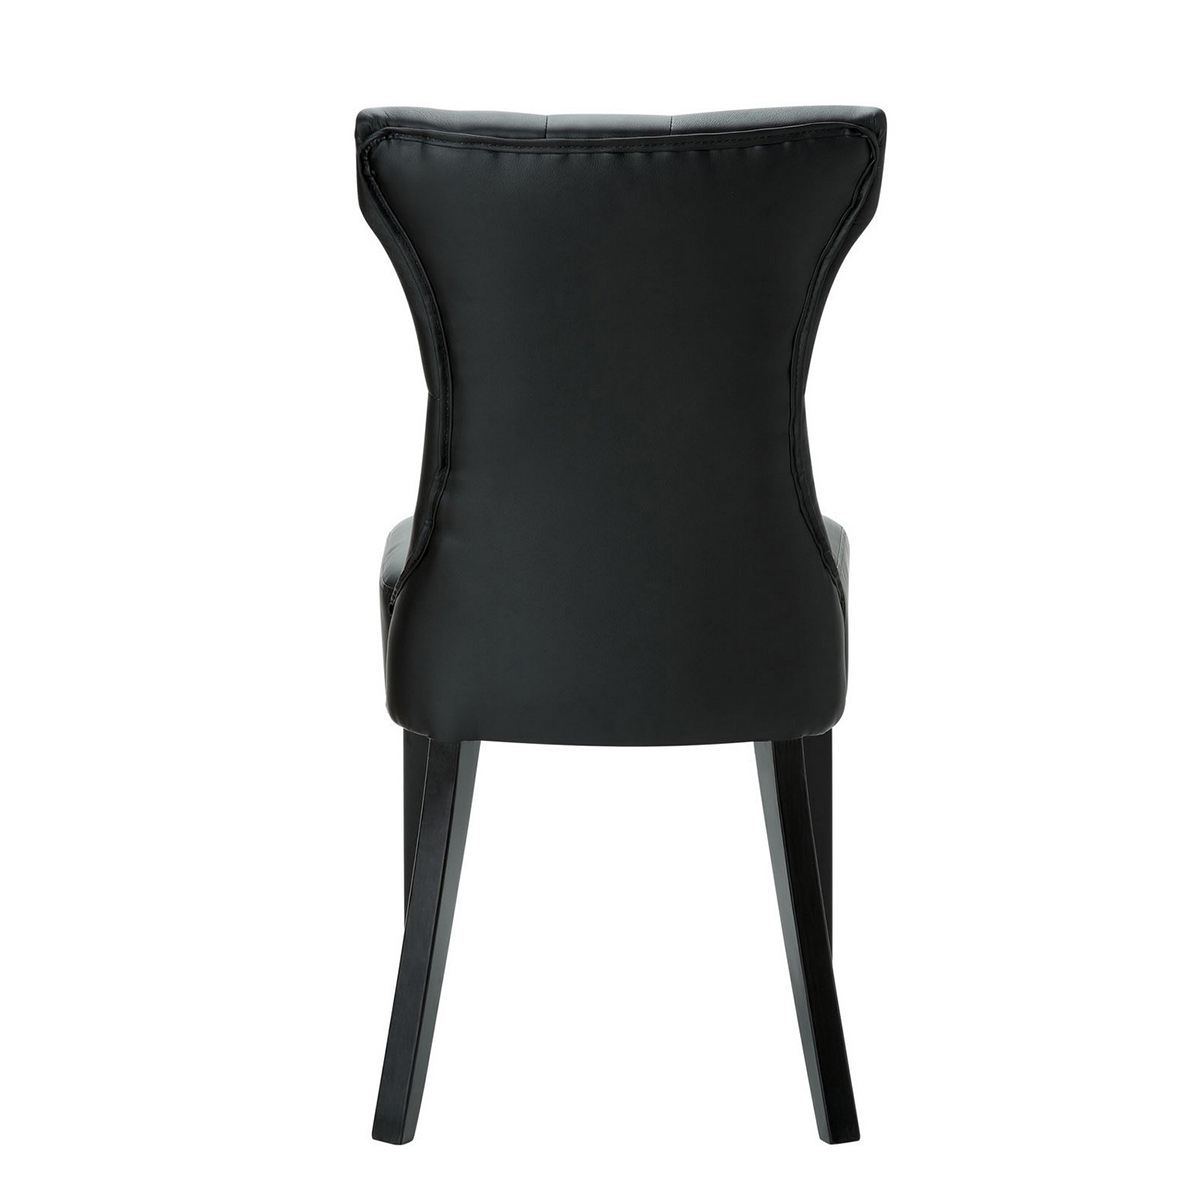 Modway Silhouette Dining Chairs Set of 2 - Black